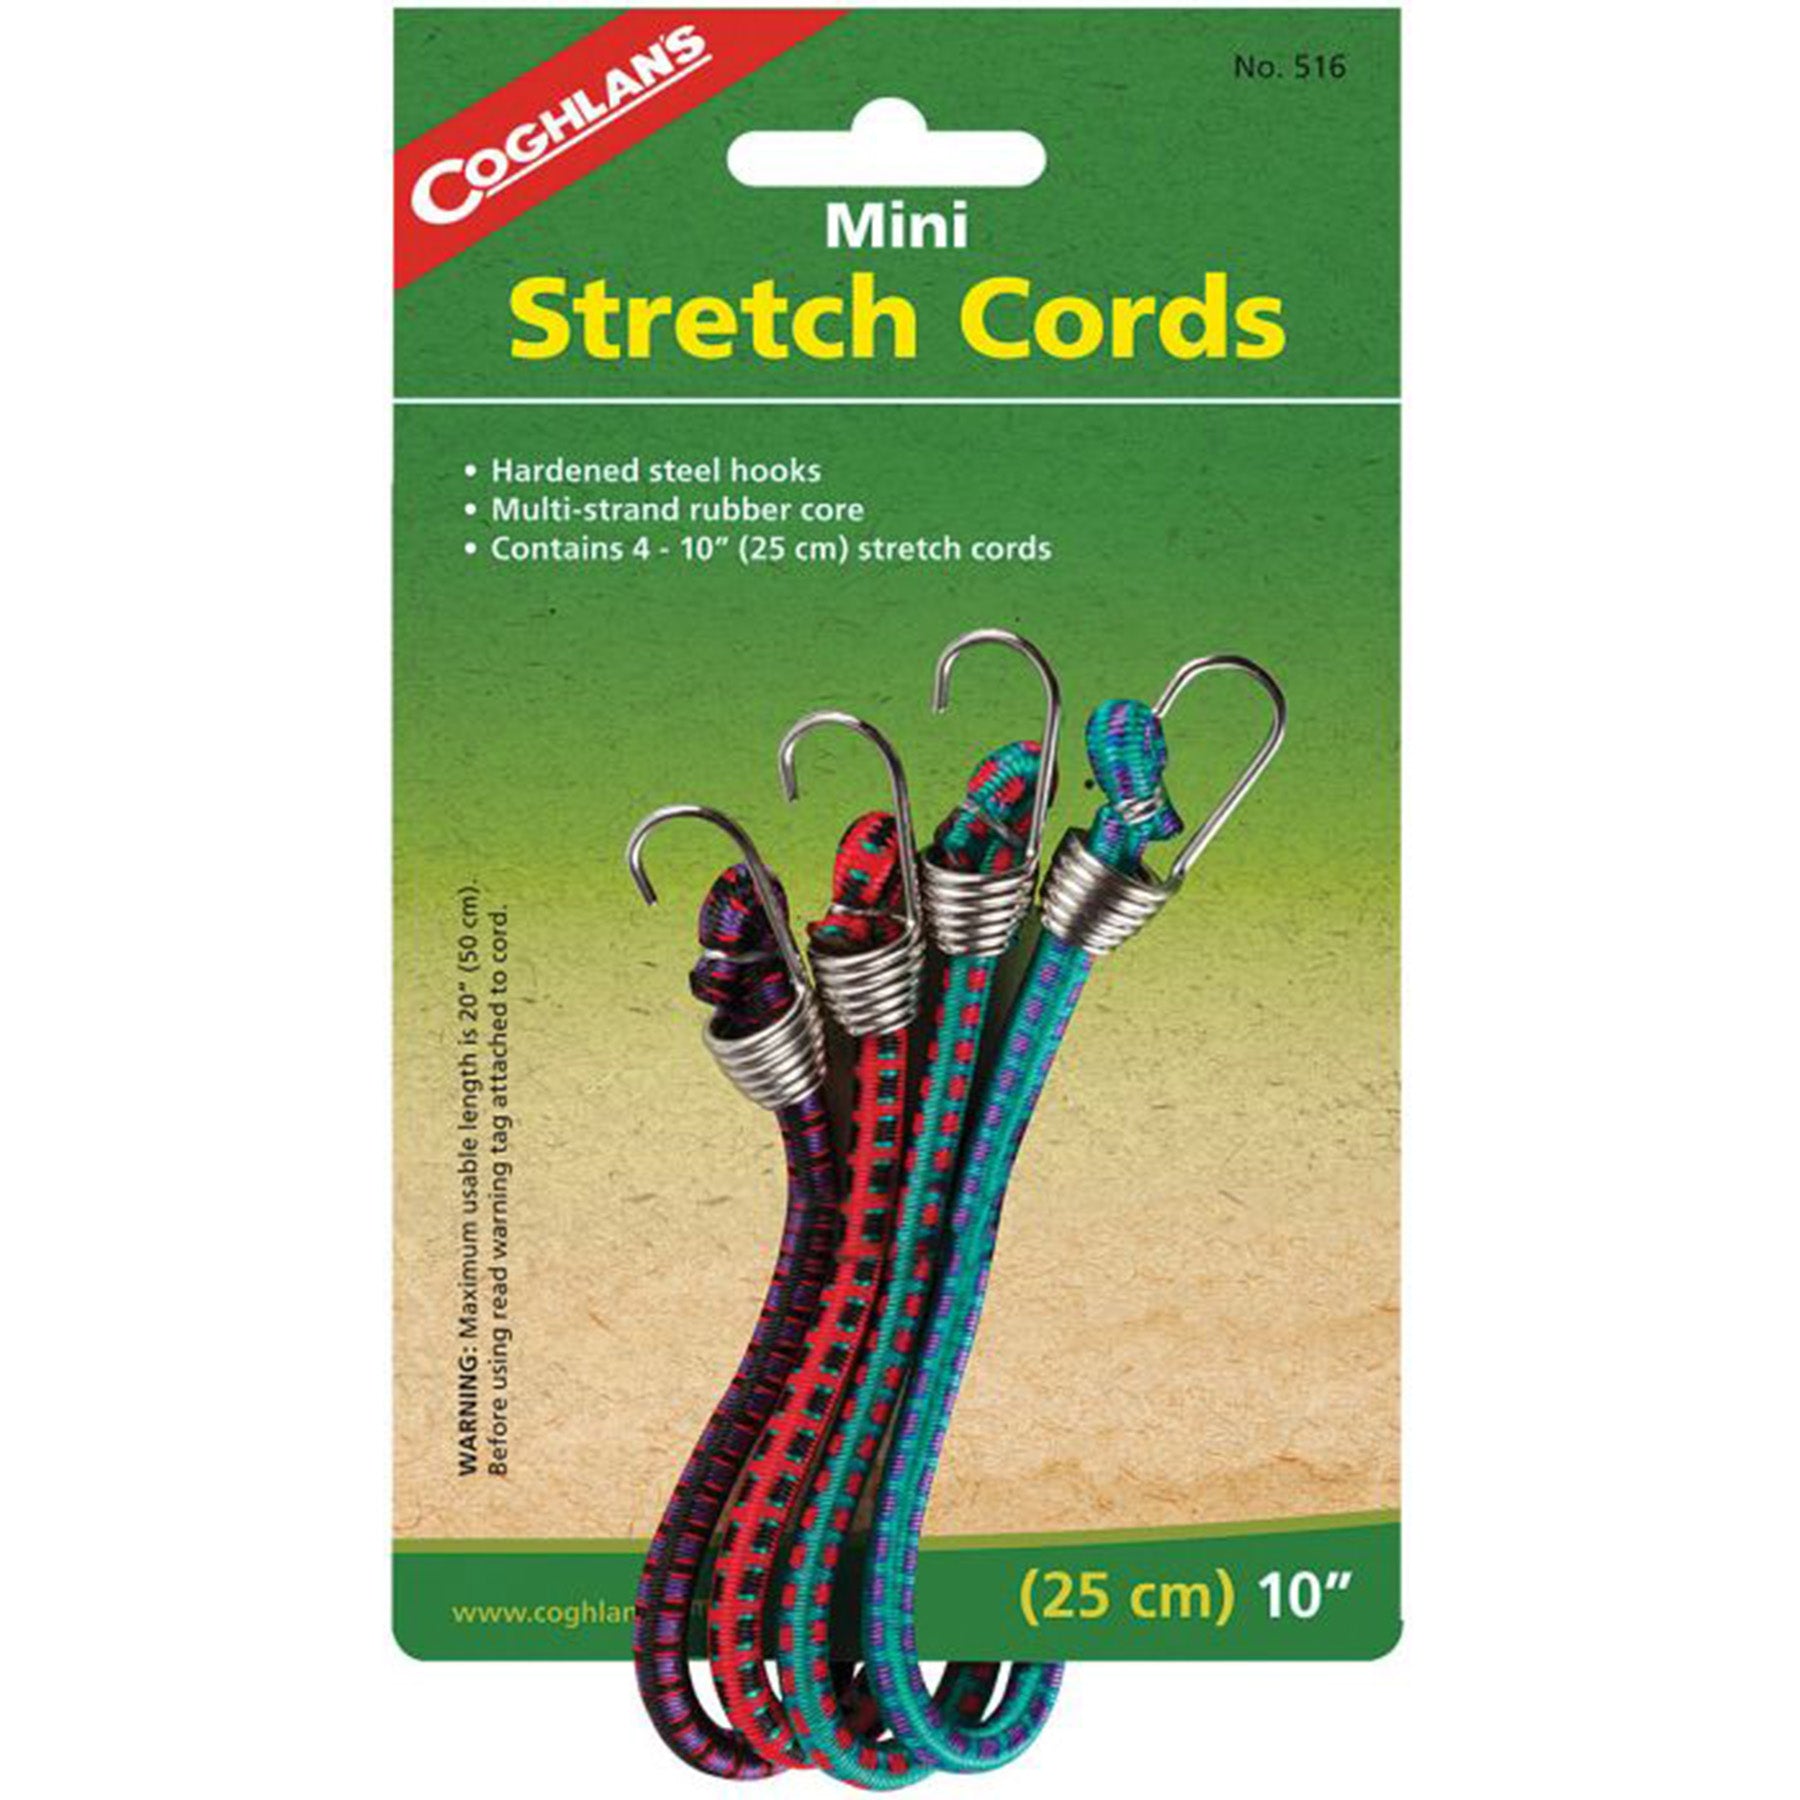 mini stretch cords, 25cm (10 inches), with steel hooks on the end